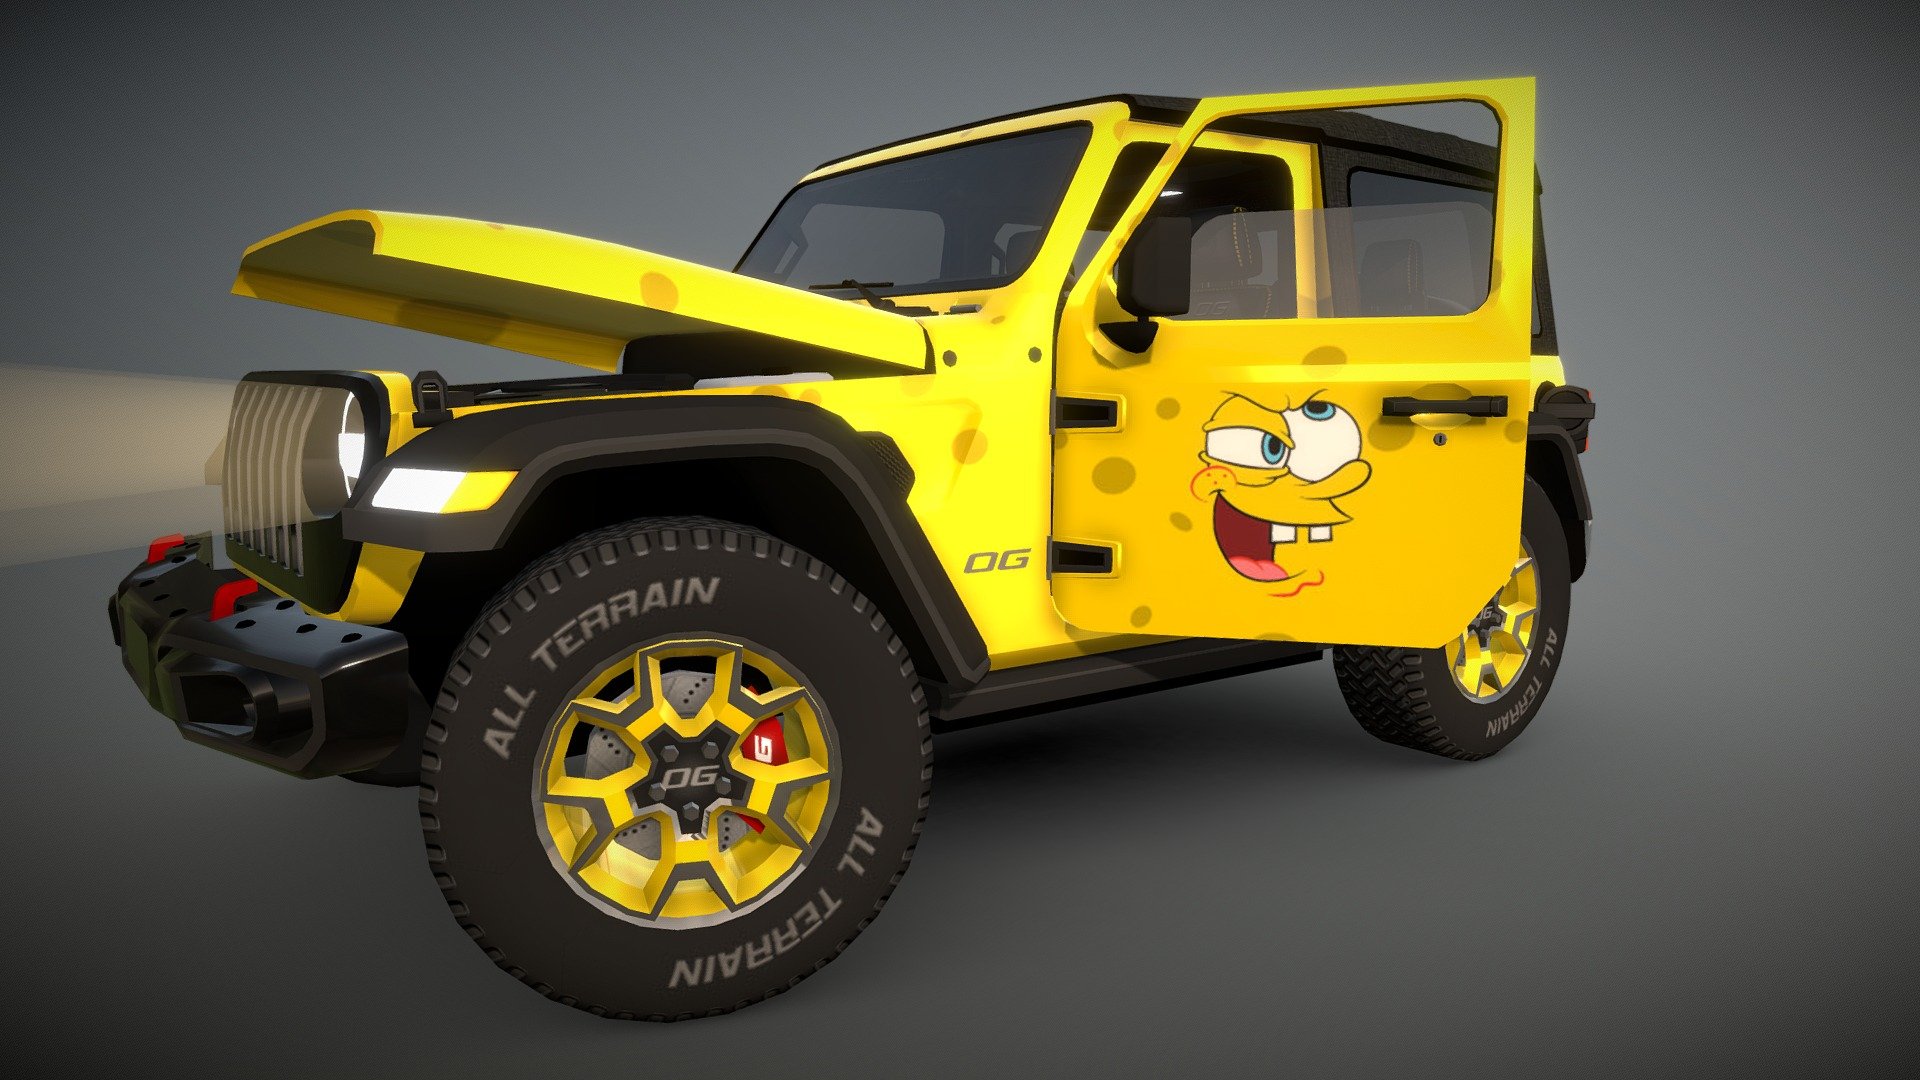 Low poly model for mobile game with interrior and moving parts
15k verts
27k triangles
16k polygons
Textures 256x256 to 2048x2048
Created in blender3d 2023, Photoshop 2023 - Jeep Wrangler Rubicon - 3D model by OG Cars (@zigzag977010) 3d model